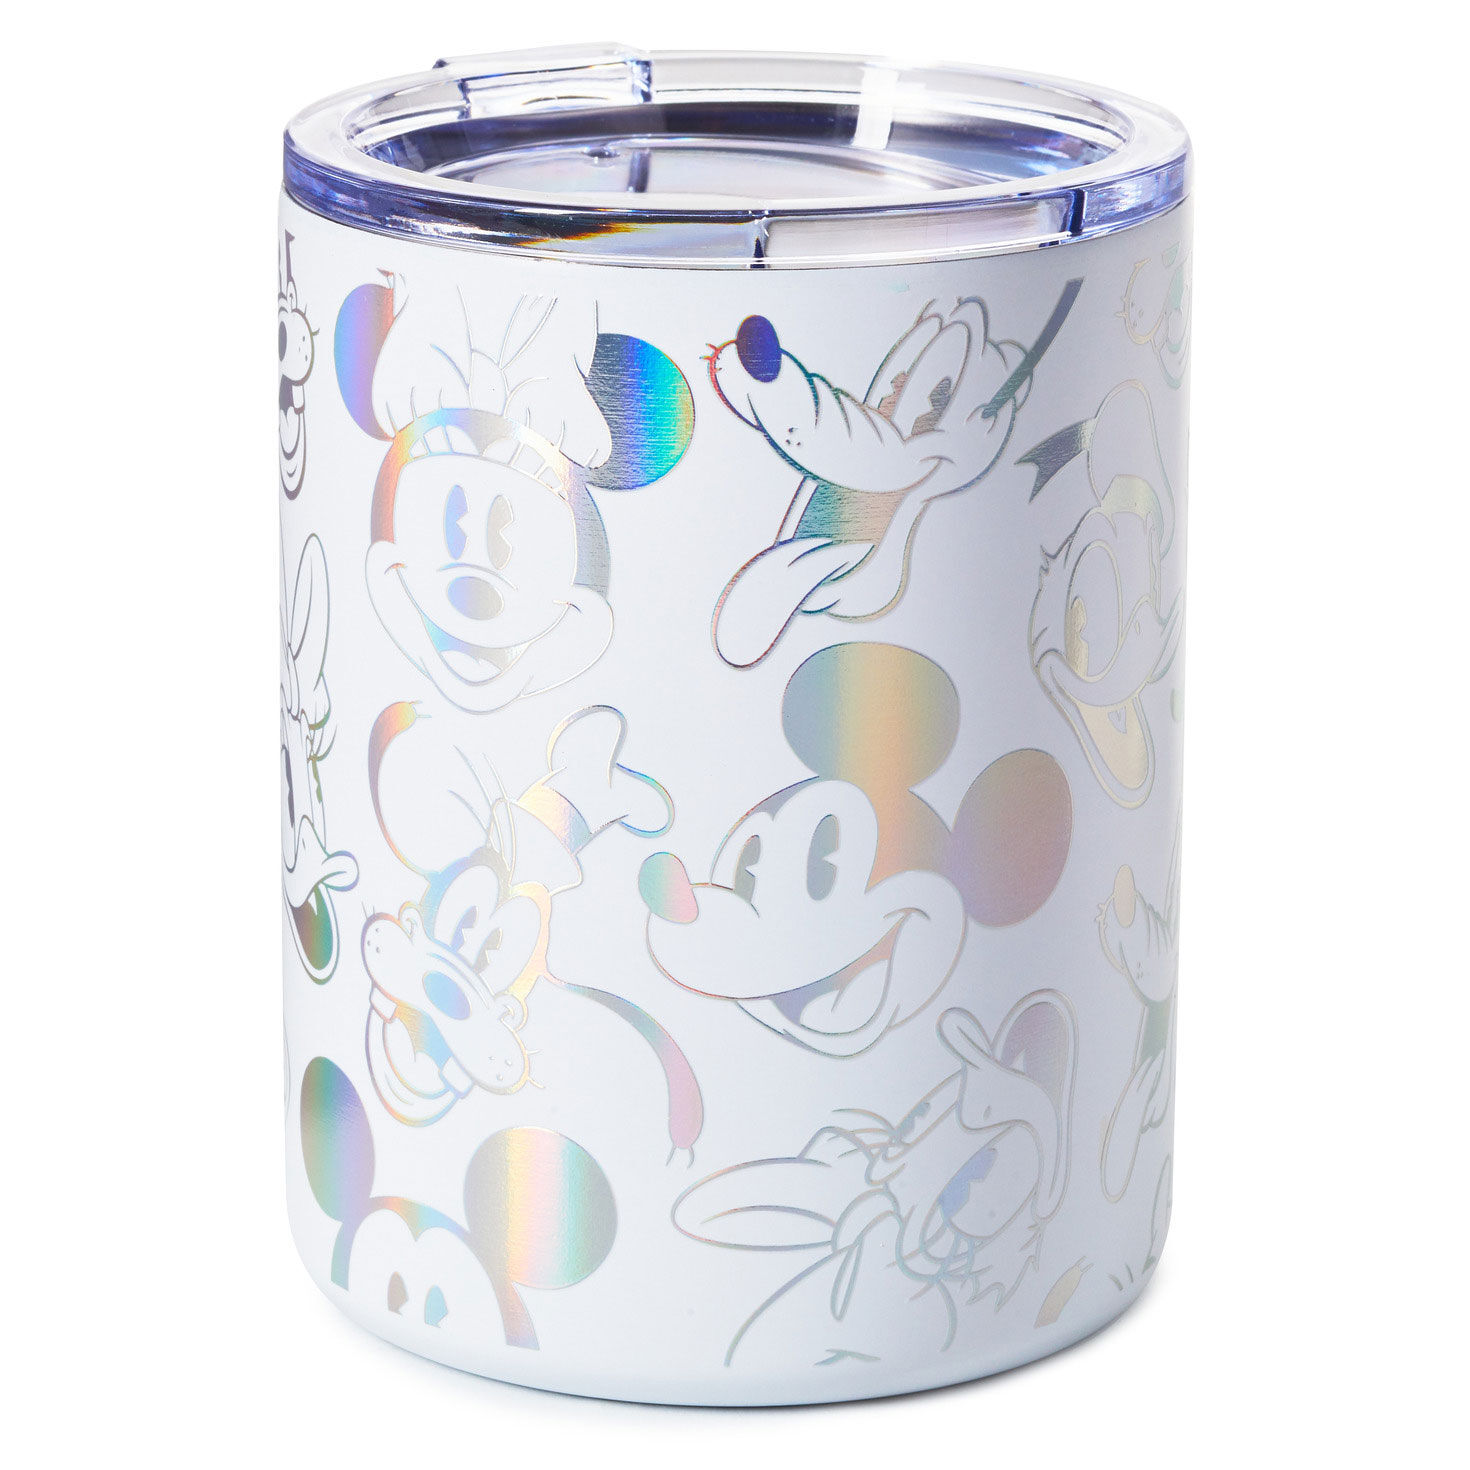 https://www.hallmark.com/dw/image/v2/AALB_PRD/on/demandware.static/-/Sites-hallmark-master/default/dwc6e965e2/images/finished-goods/products/1DYG2083/Mickey-and-Friends-Iridescent-Insulated-Mug_1DYG2083_01.jpg?sfrm=jpg